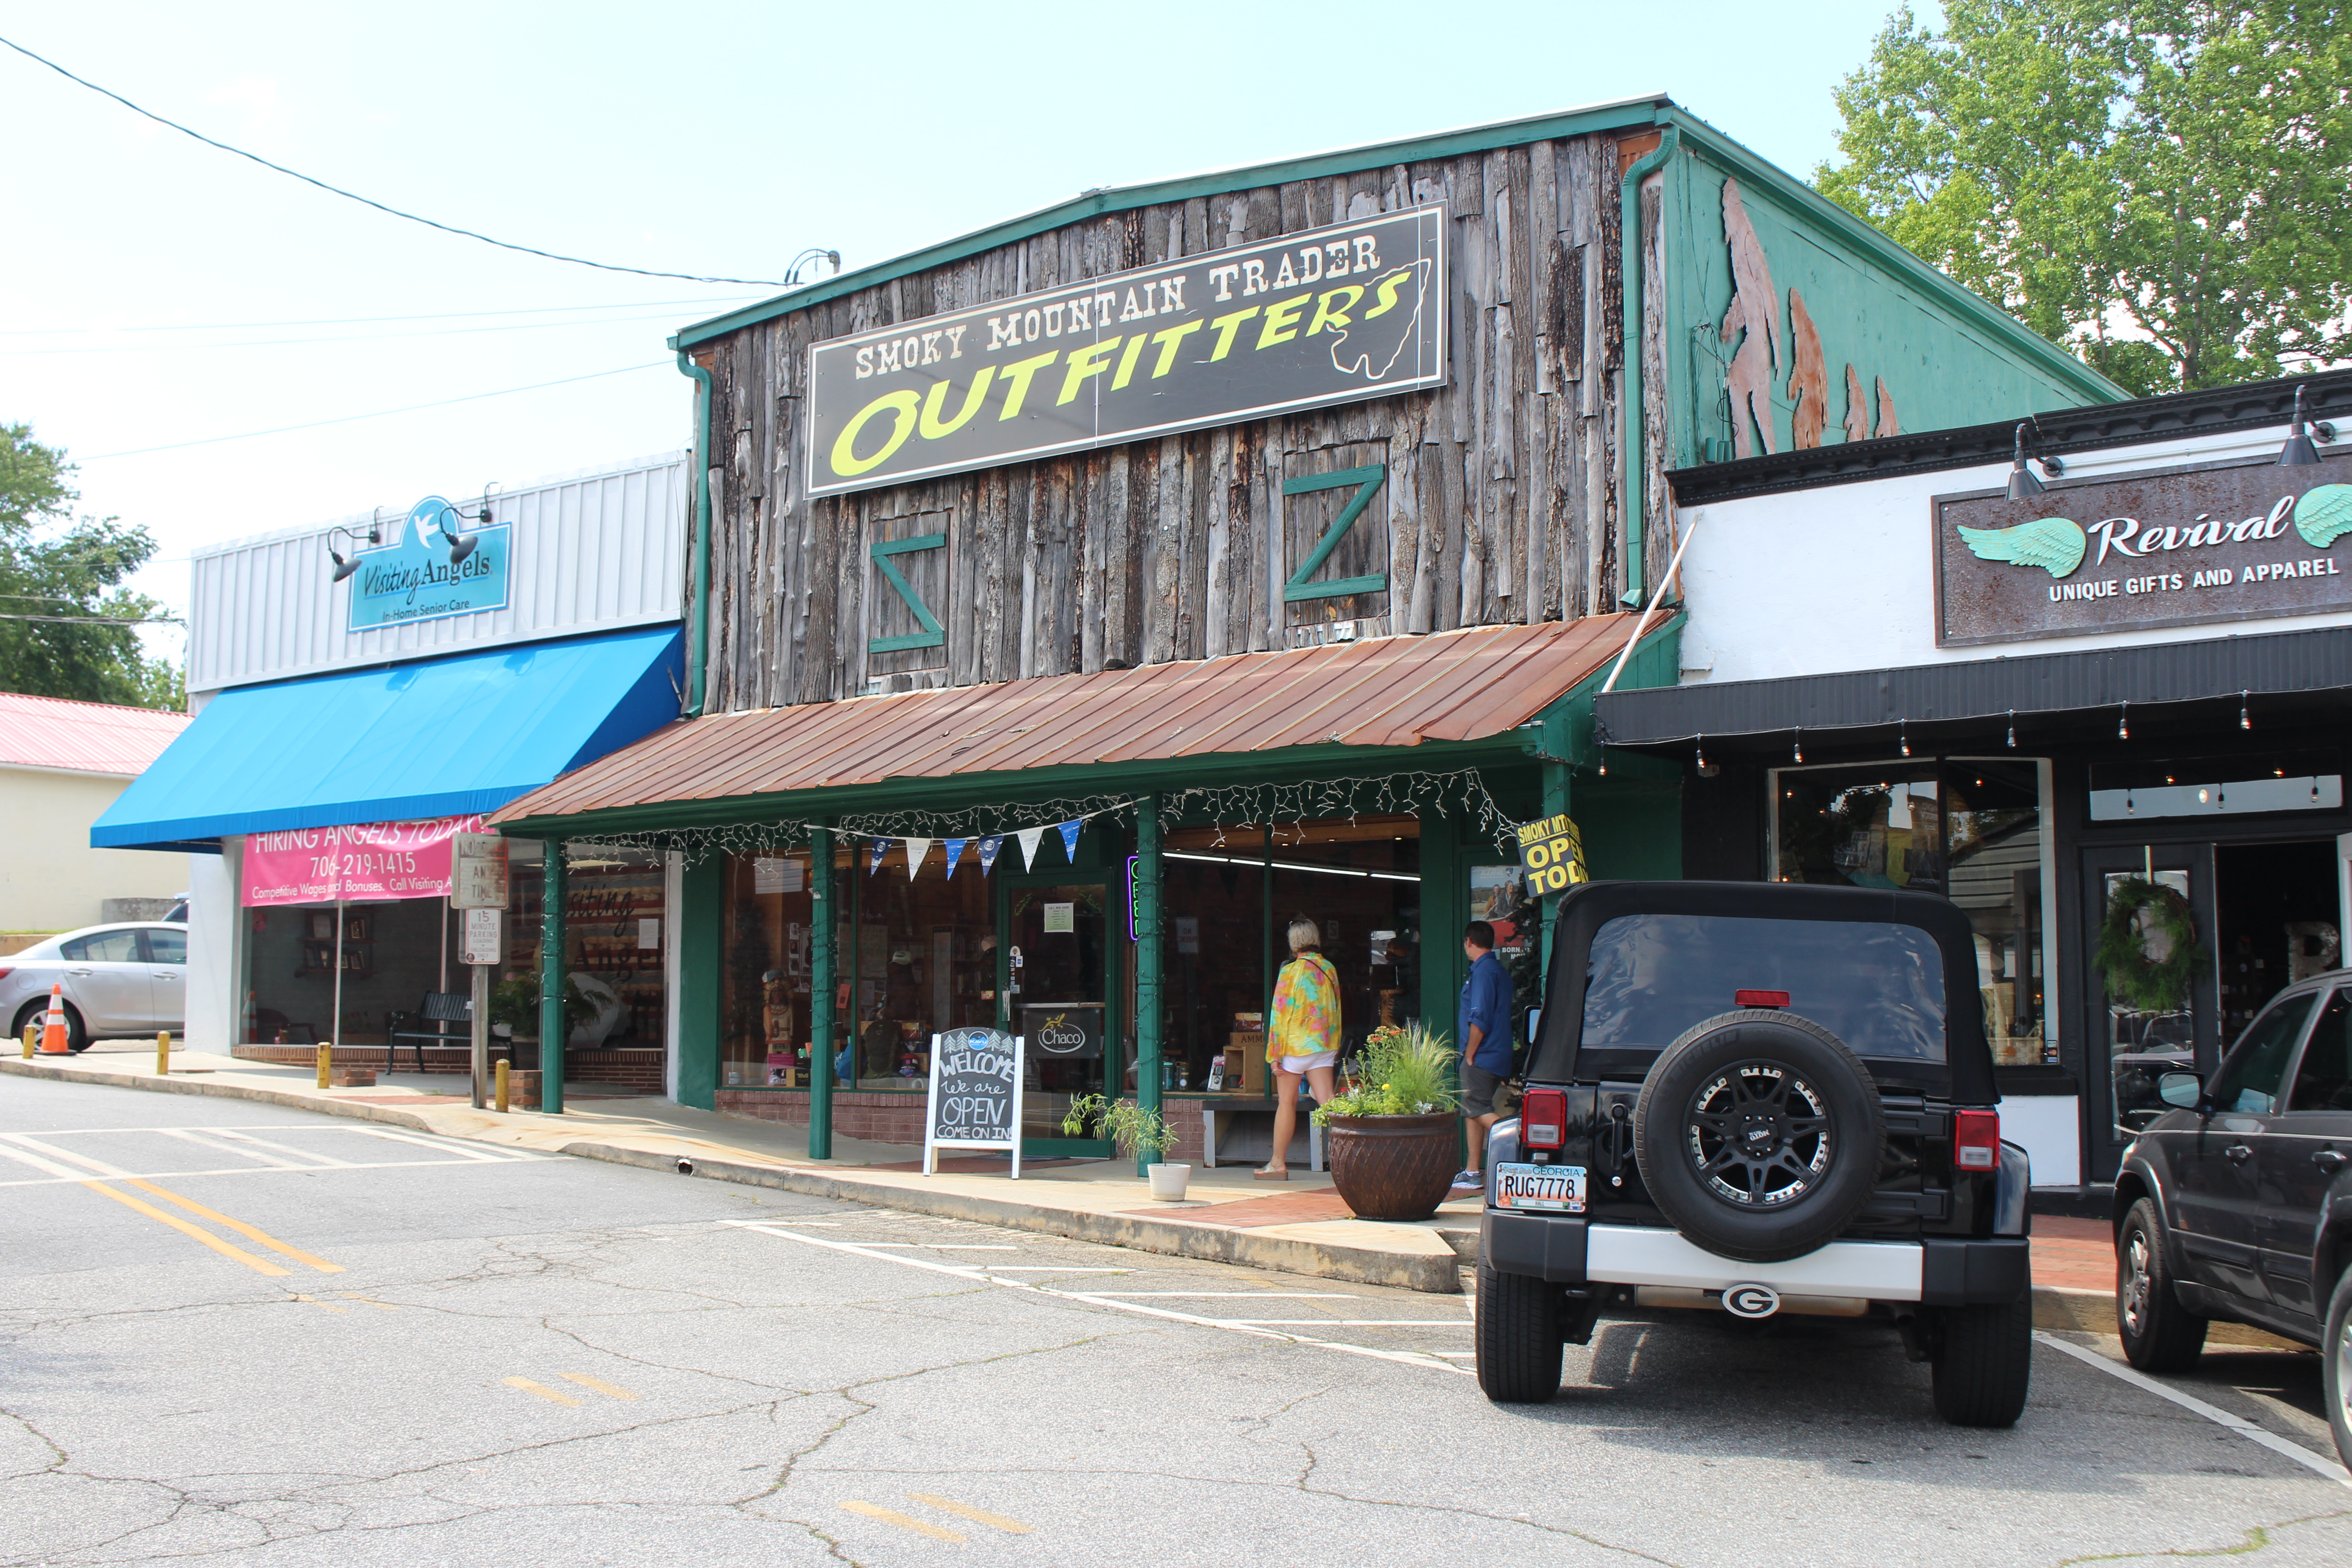 Smoky Mountain Trader Outfitters, Cleveland.jpg. 